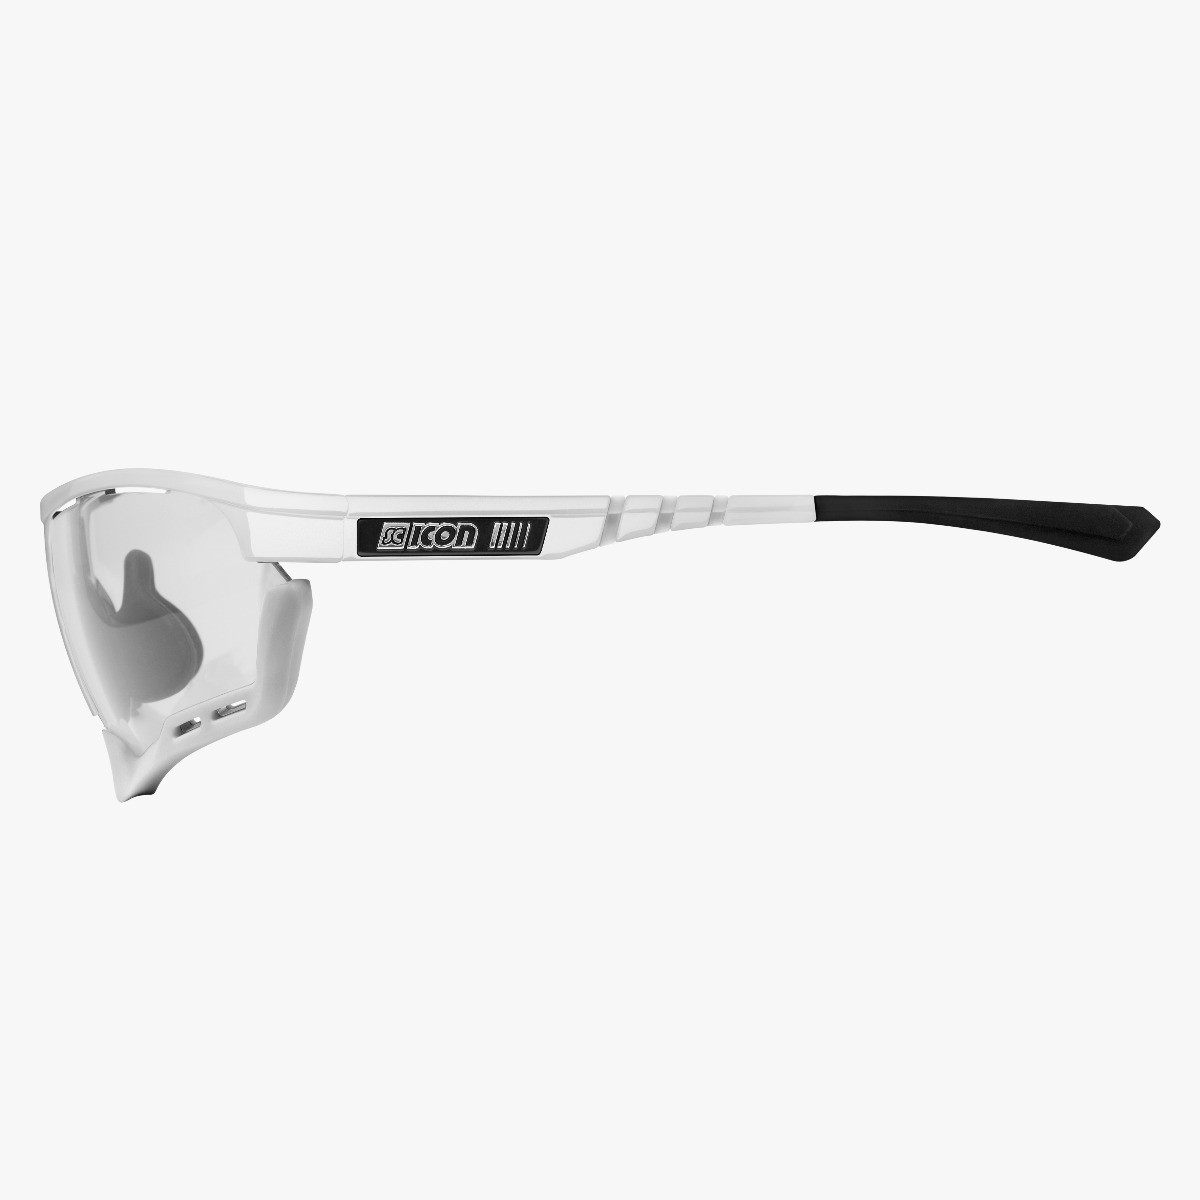 Scicon Sports | Aerocomfort Sport Cycling Performance Sunglasses - White Gloss / Photocromatic Blue - EY15130402
